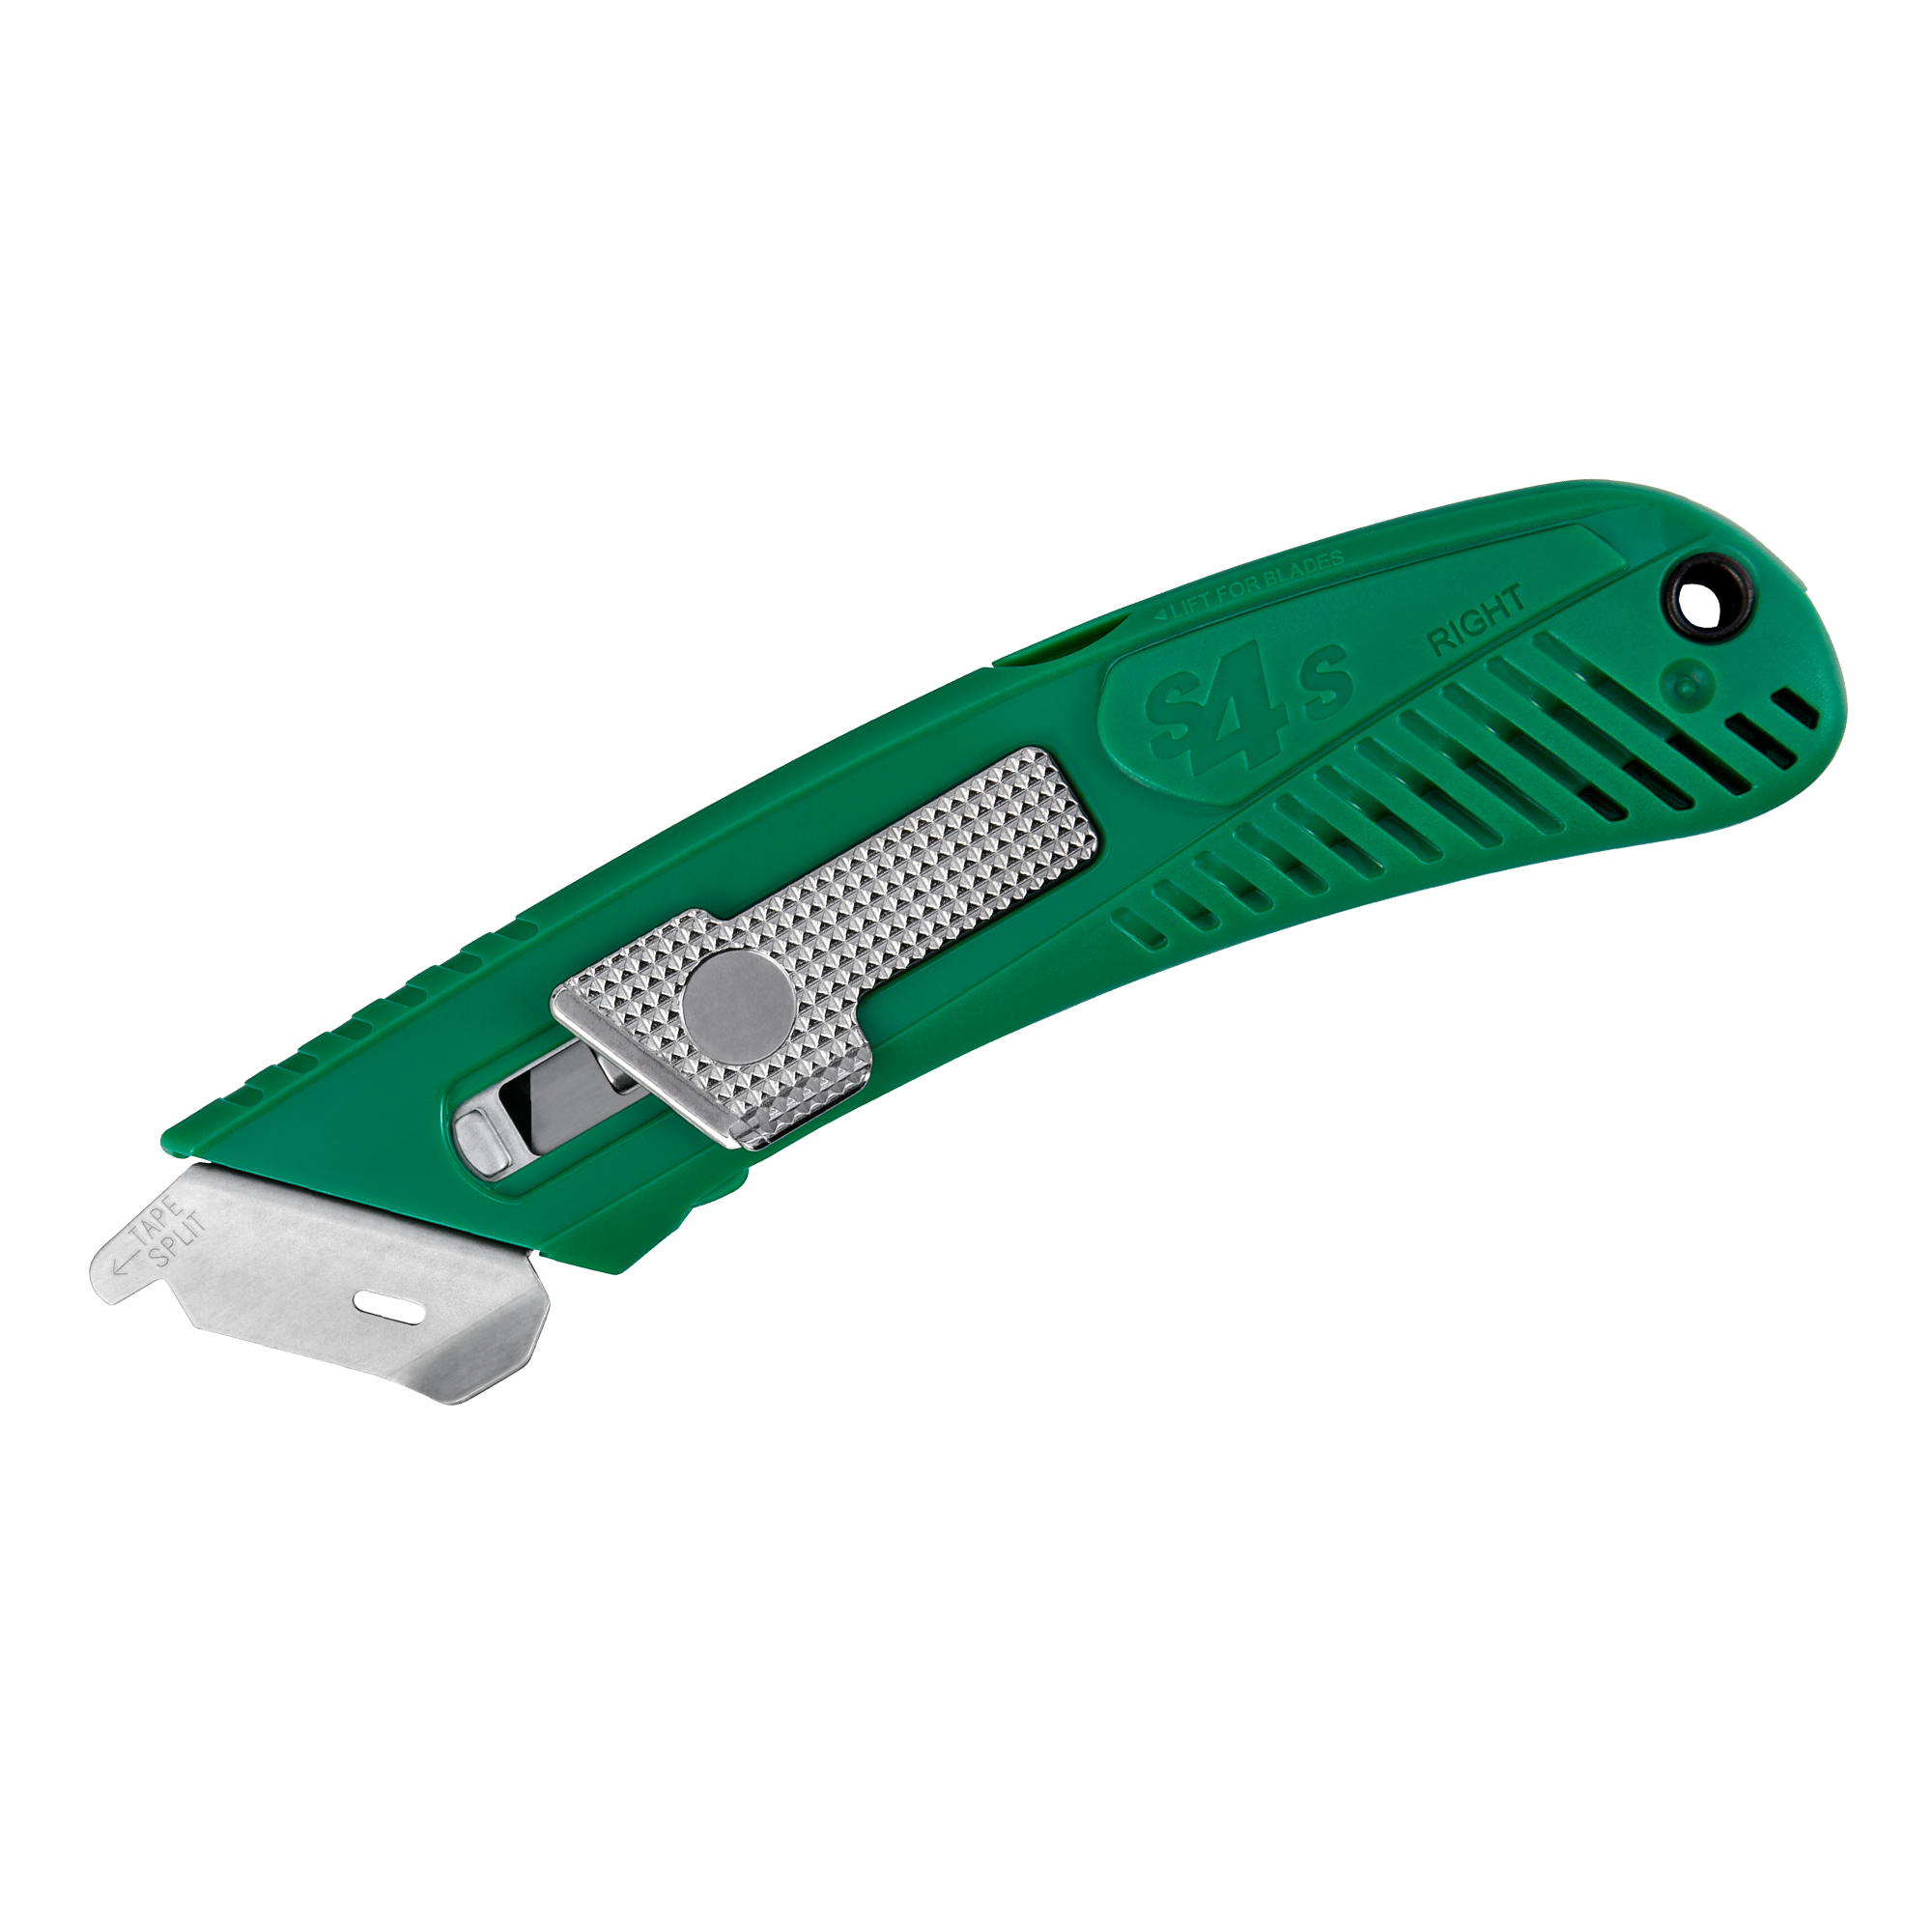 S4 Safety Cutter — Merchandising Tools